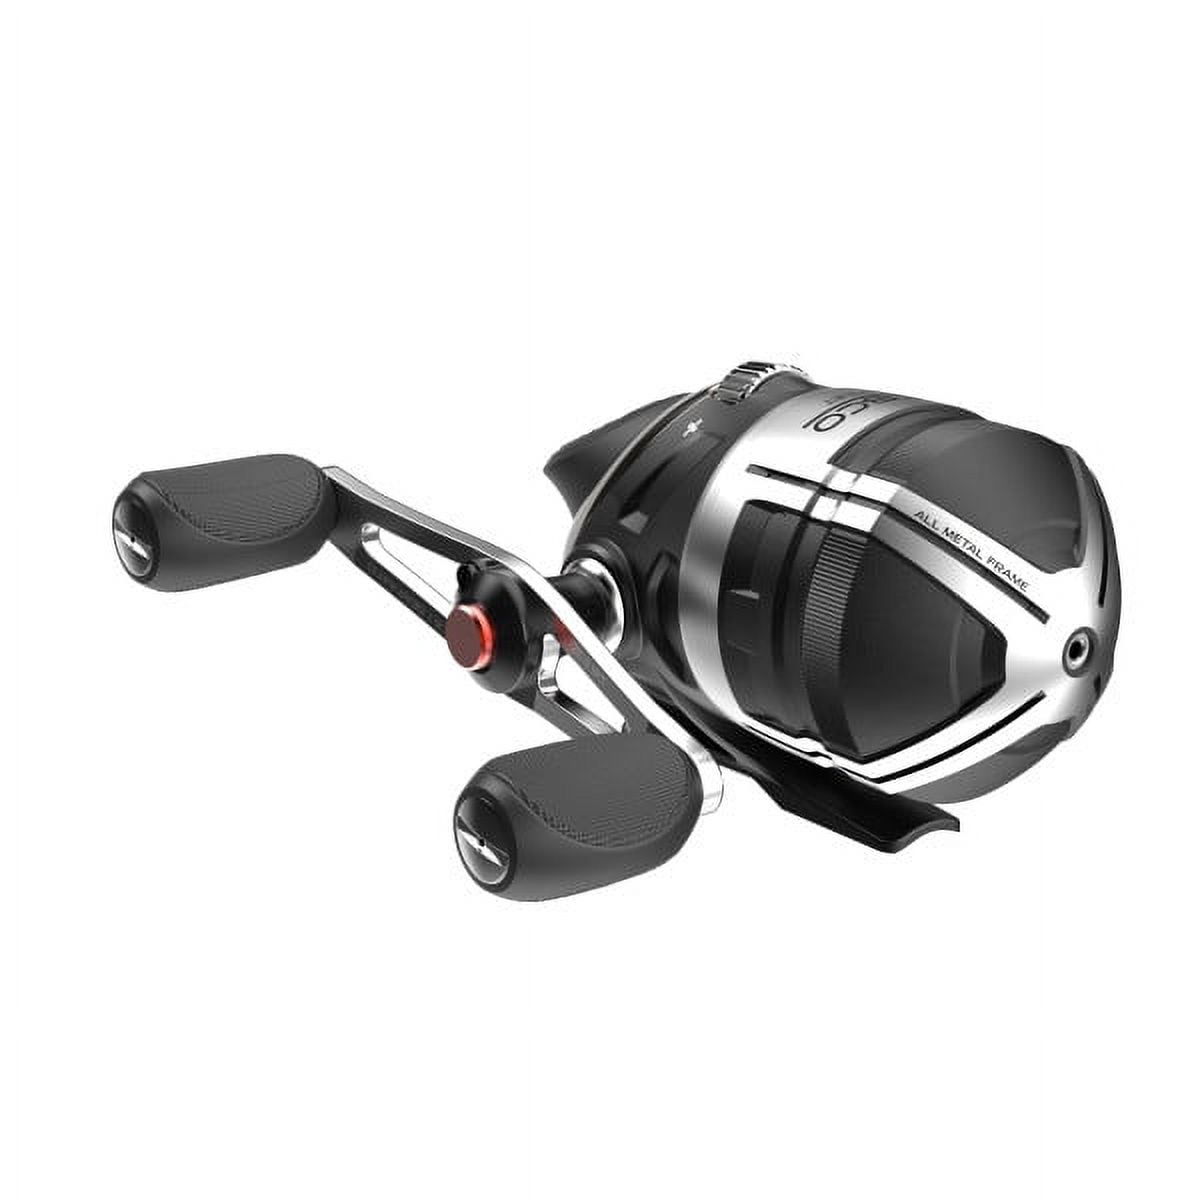 Zebco Bullet Spincast Fishing Reel, Size 20 Reel, Fast 28.9 Inches Per  Turn, 5.8:1 Gear Ratio, Durable All-Metal Construction, Solid-Brass Pinion  Gear, Pre-spooled with 6 lb Zebco Fishing Line, Black 